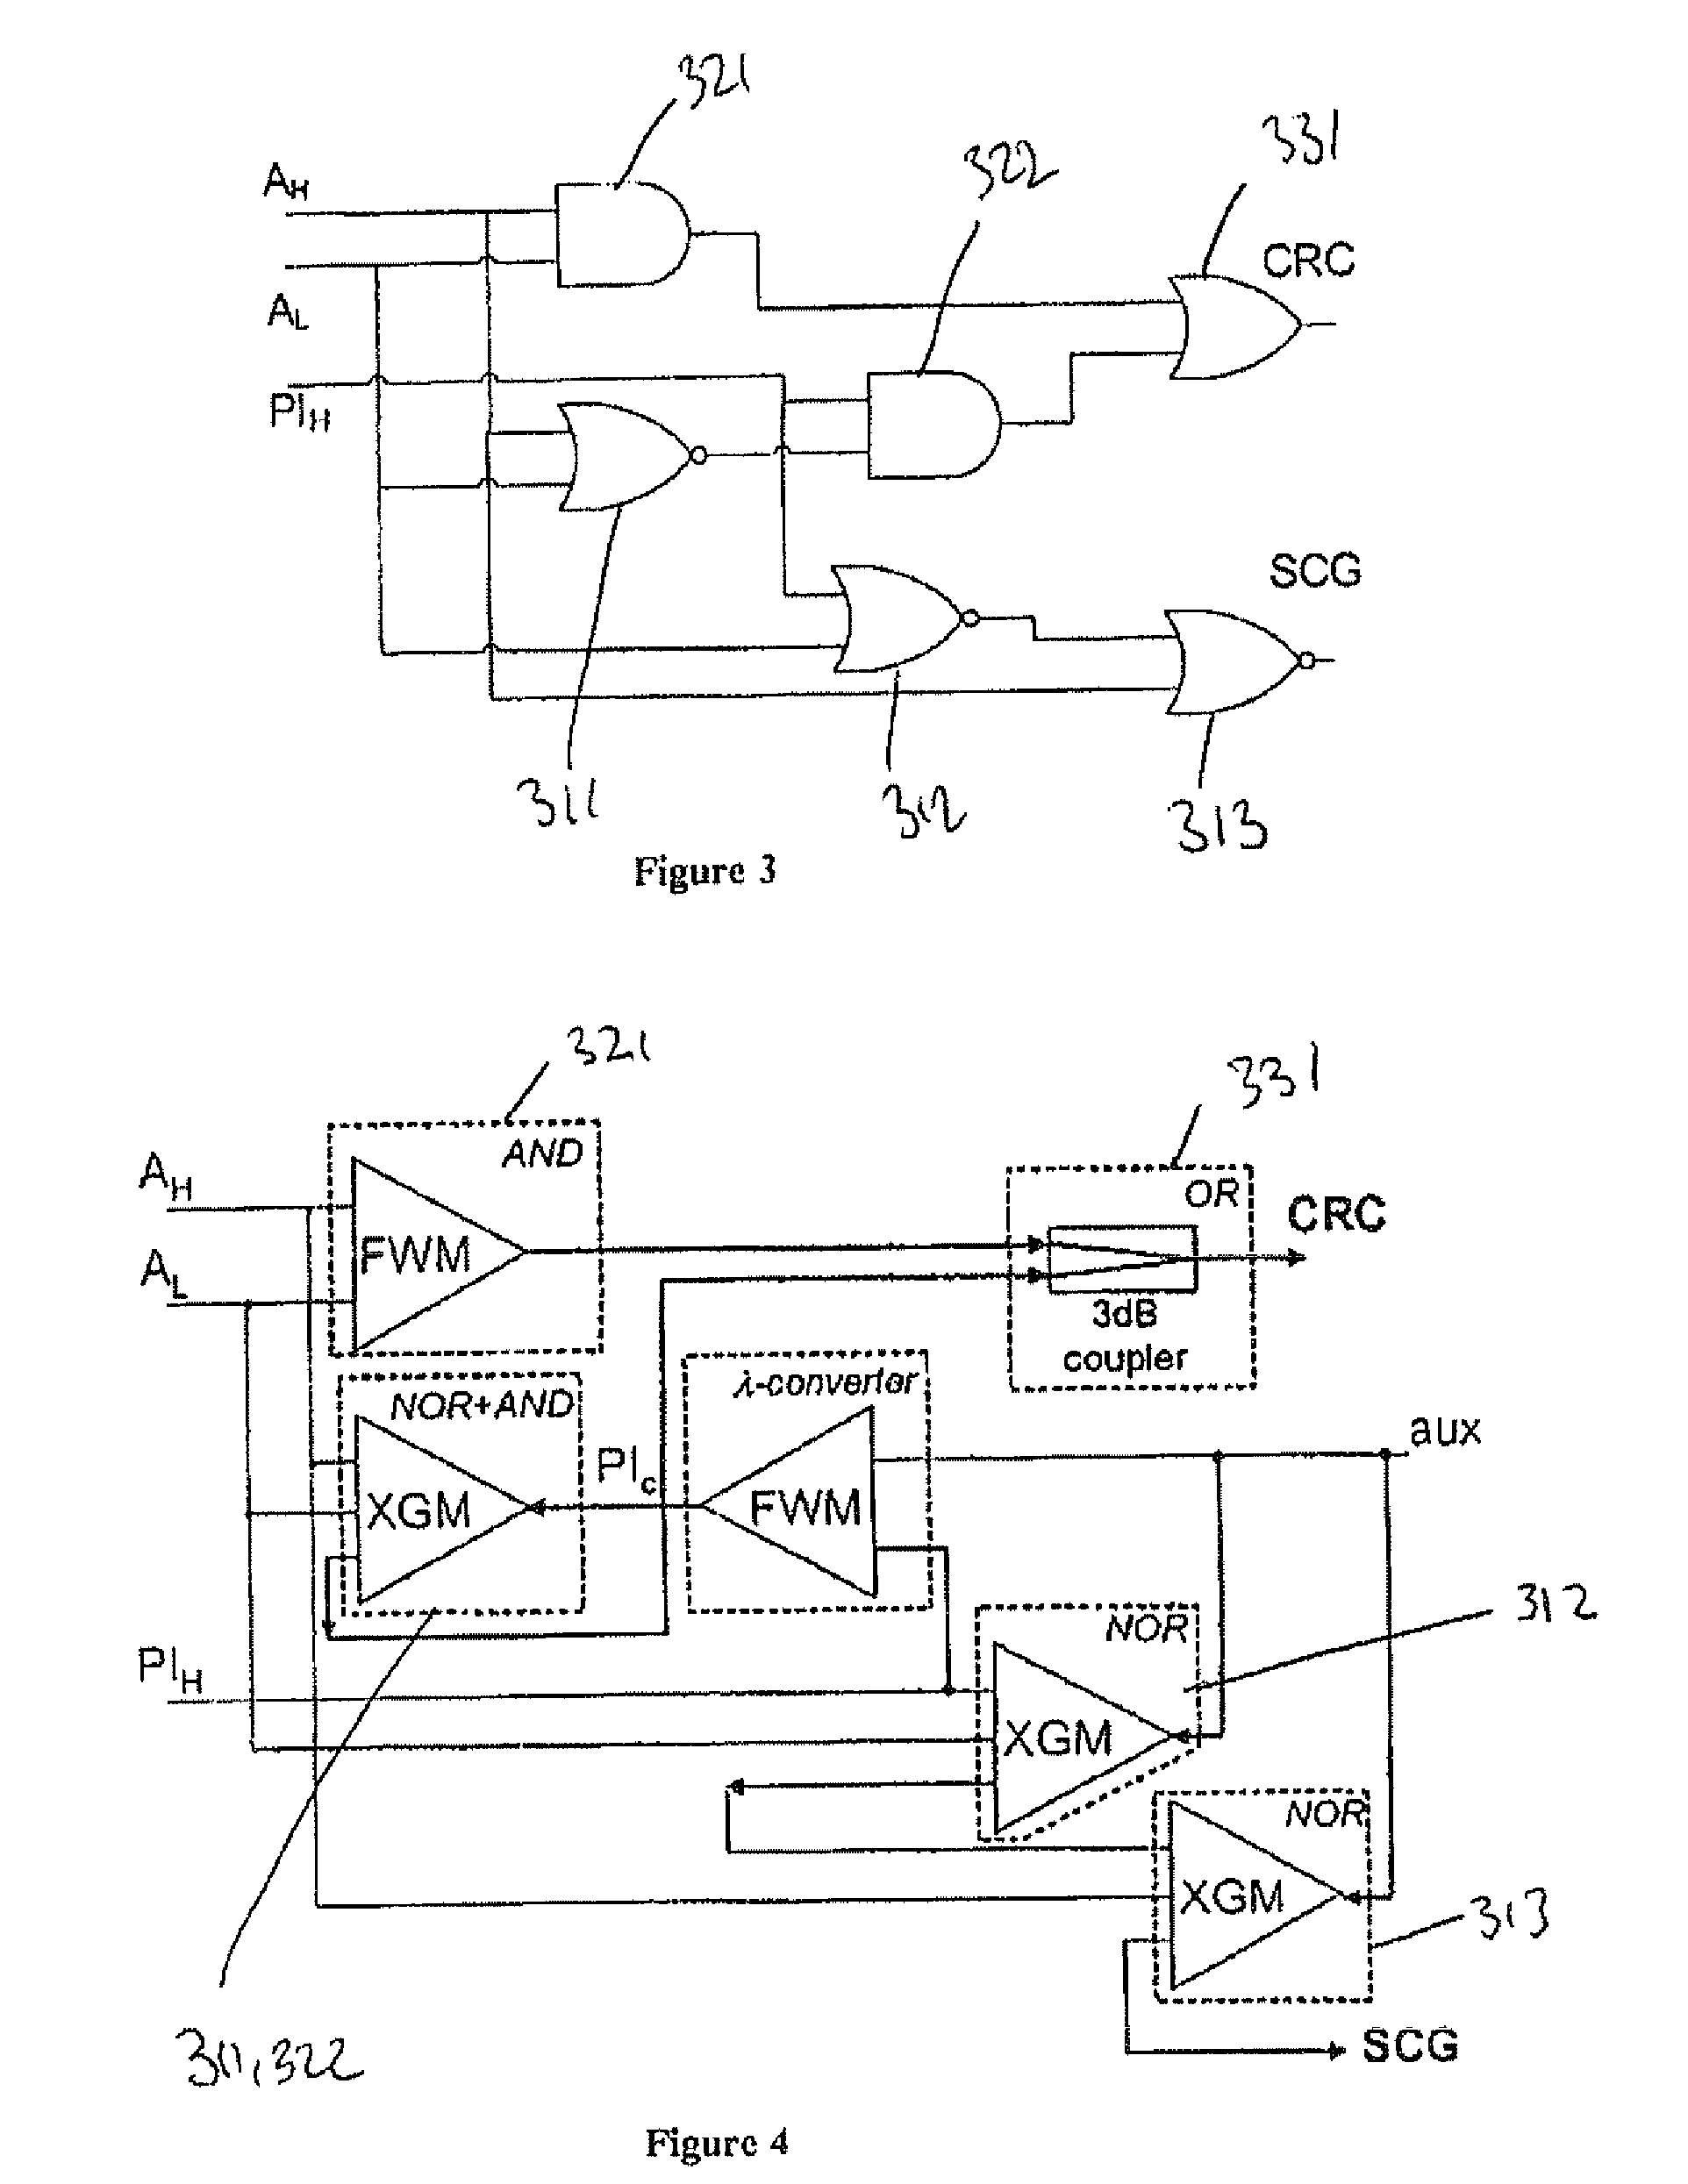 All optical processing circuit for conflict resolution and switch configuration in a 2x2 optical node